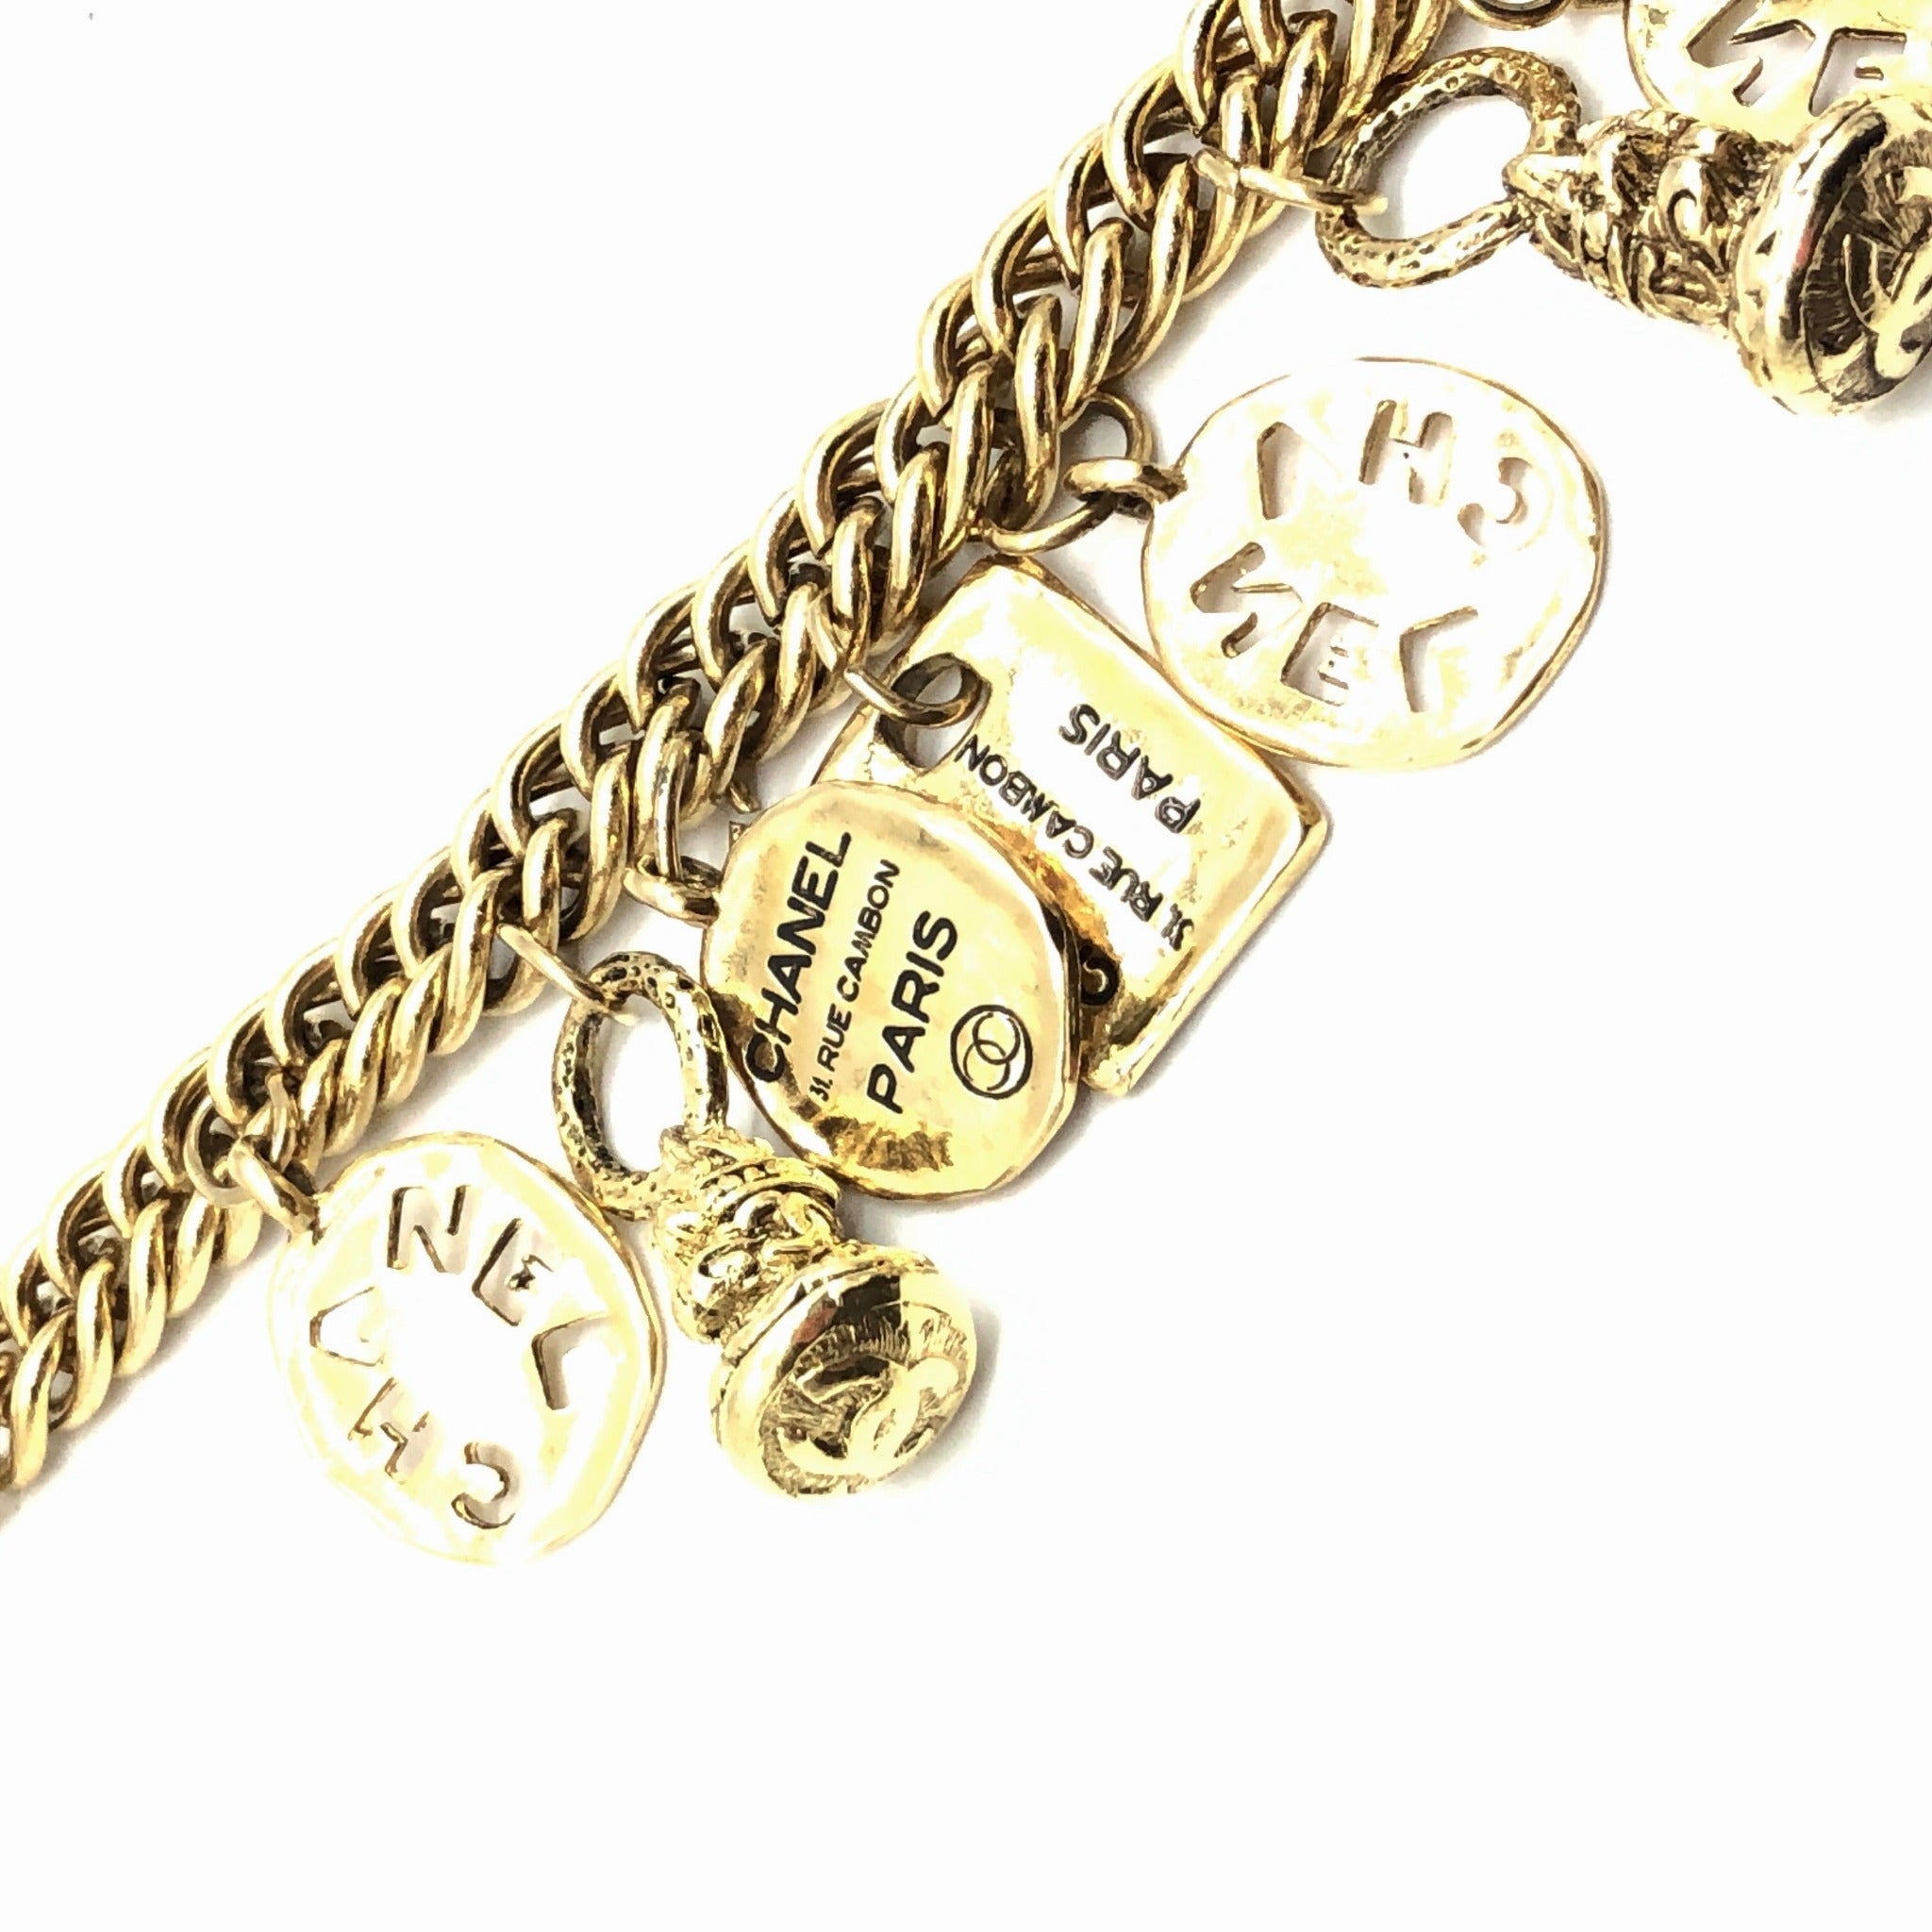 Vintage Chanel Charm Bracelet with Seal Charms – Very Vintage